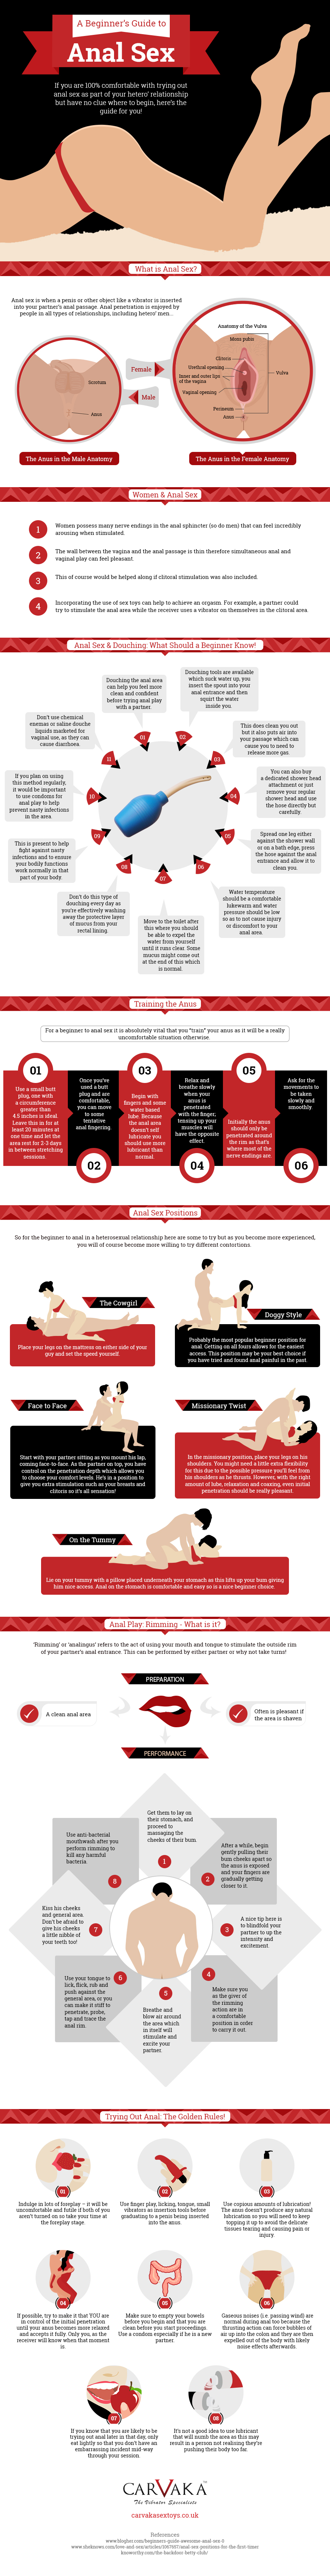 A Beginner's Guide to Anal Sex